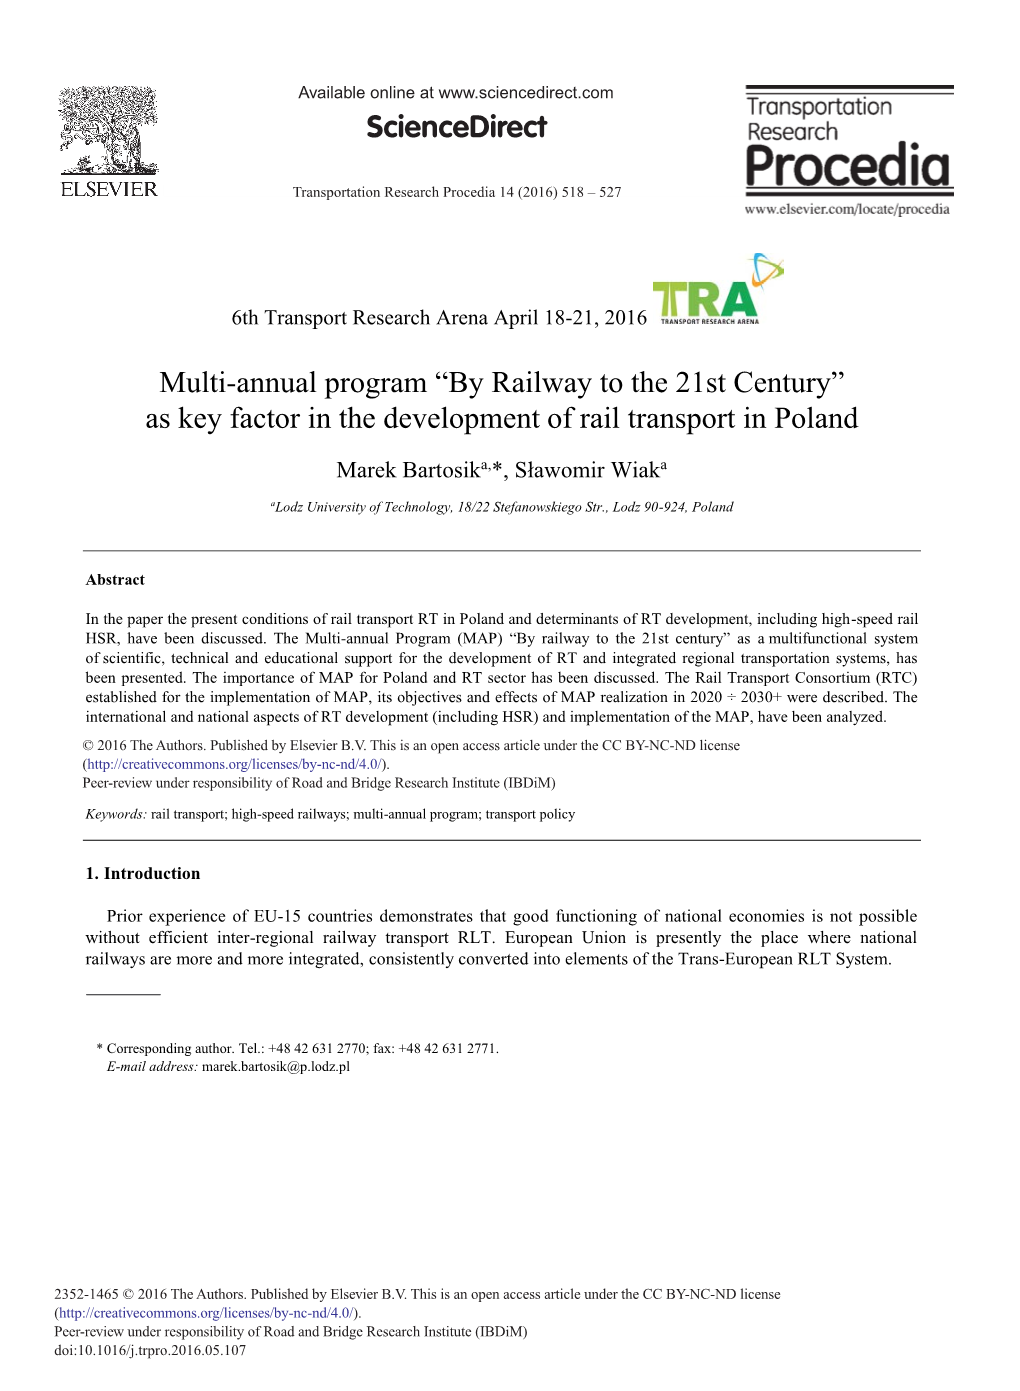 By Railway to the 21St Century” As Key Factor in the Development of Rail Transport in Poland